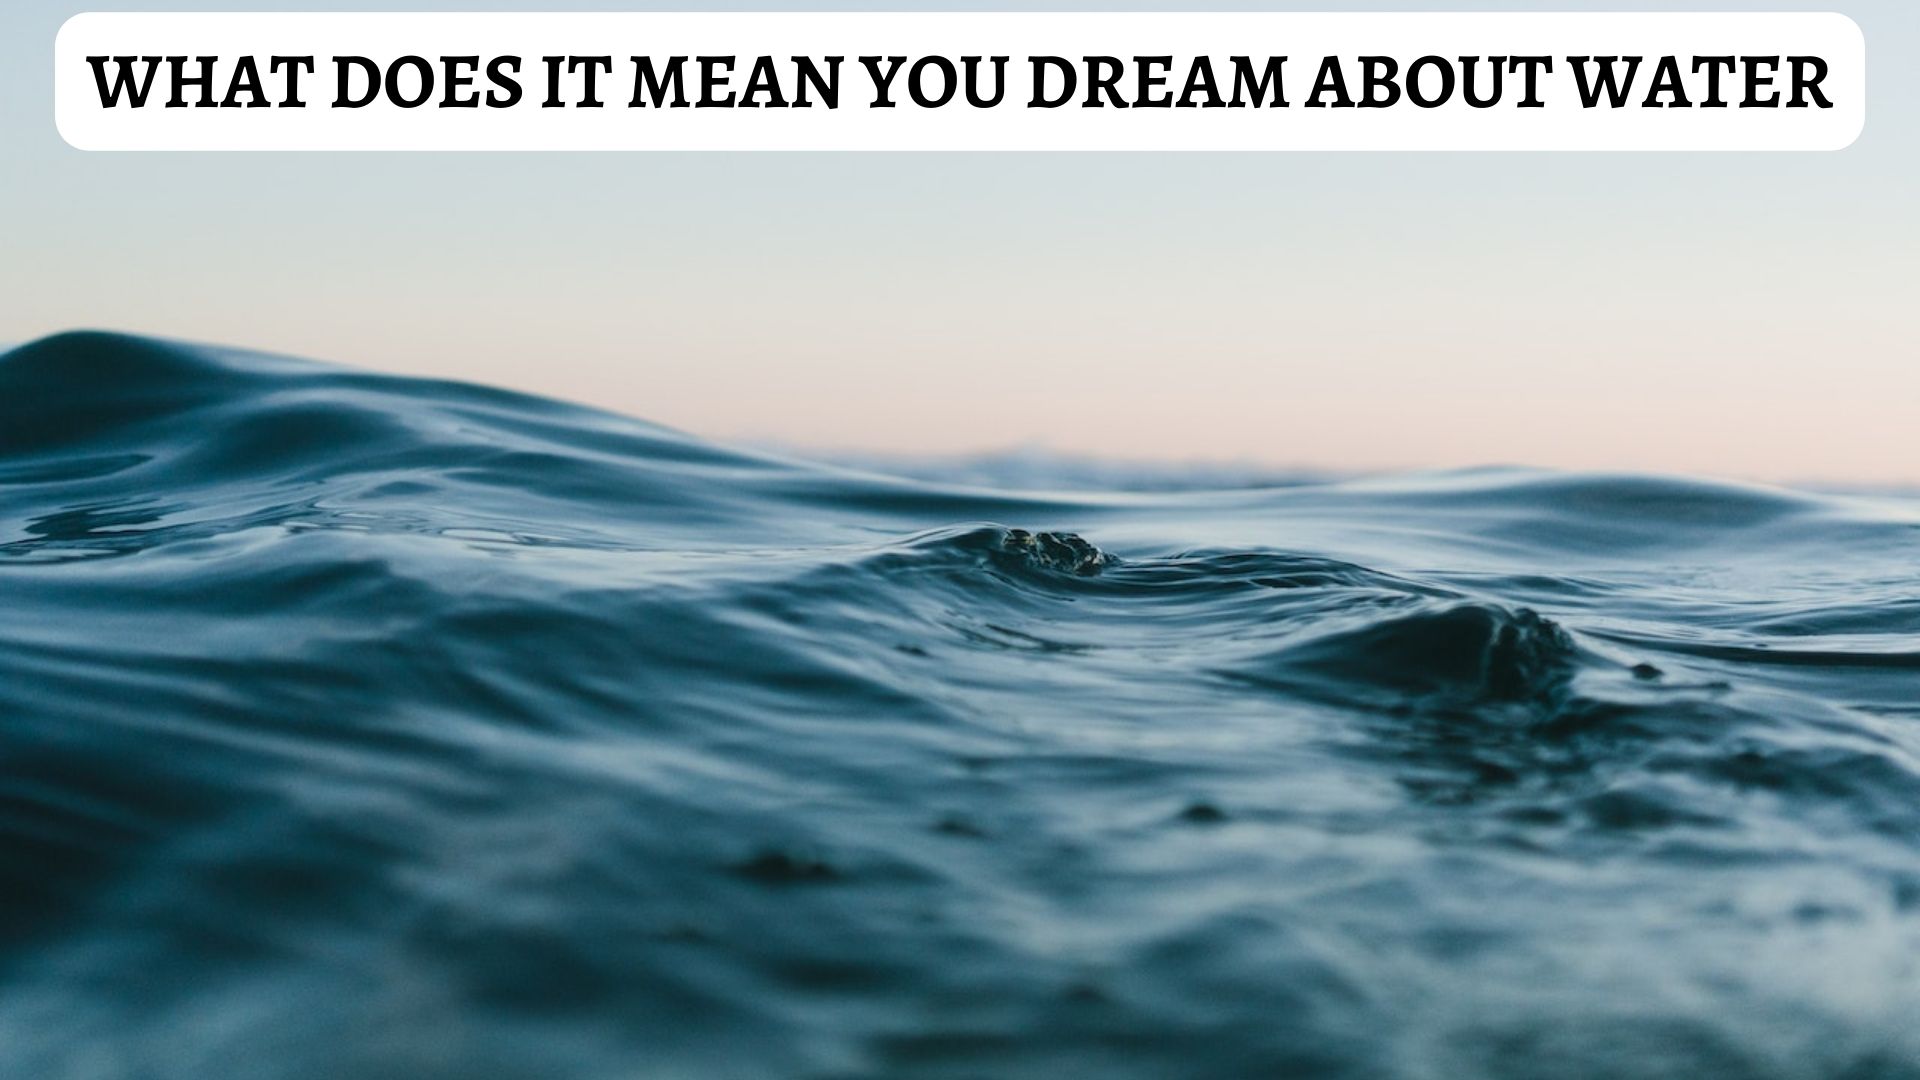 What Does It Mean You Dream About Water?